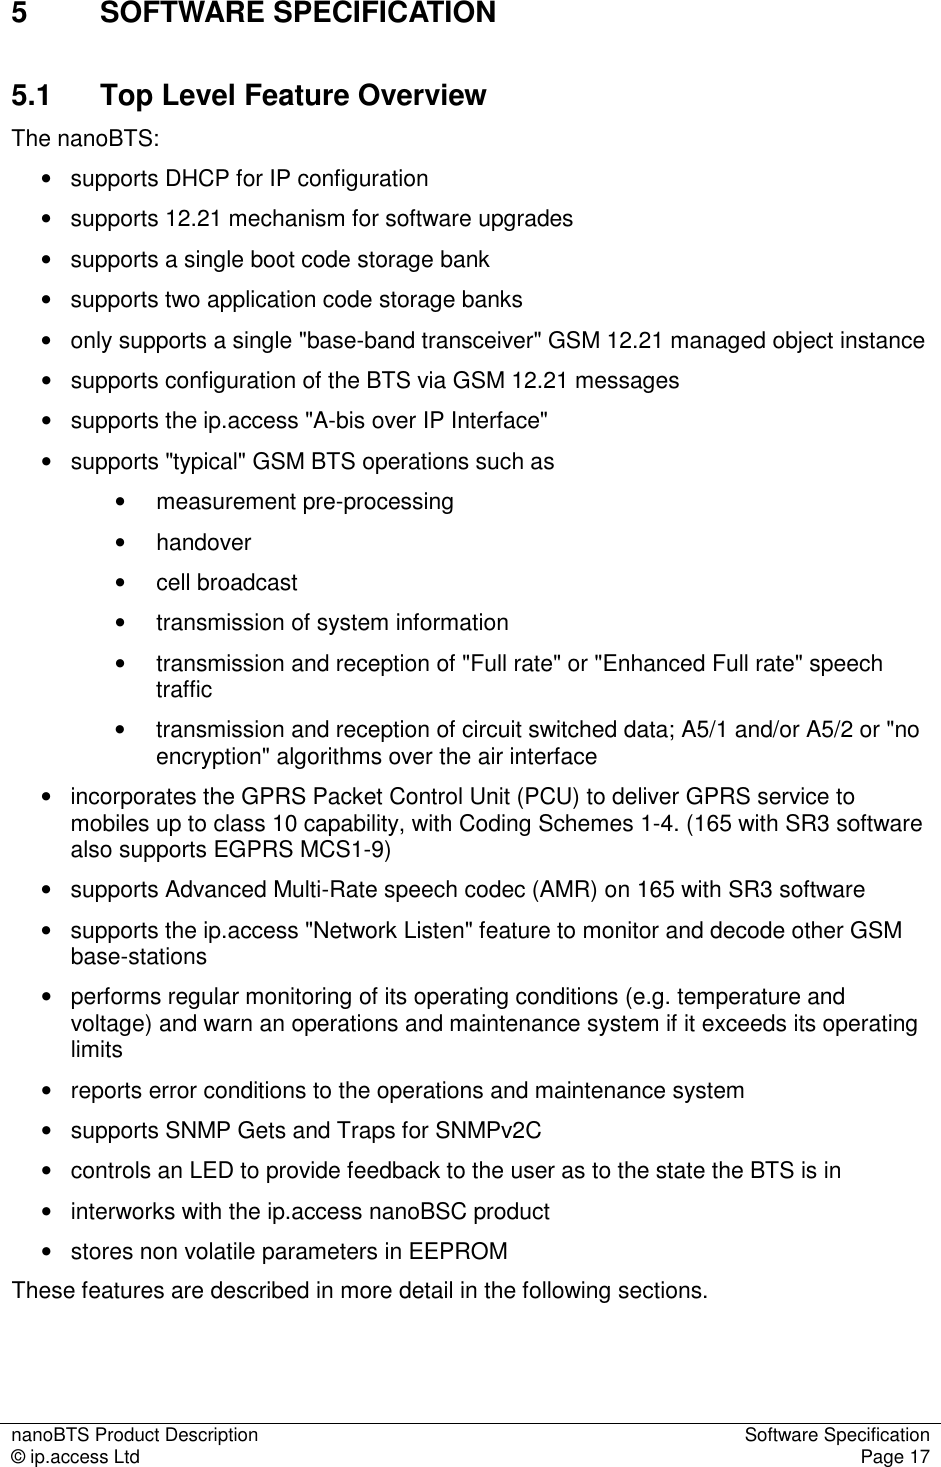 nanoBTS Product Description  Software Specification © ip.access Ltd  Page 17  5  SOFTWARE SPECIFICATION 5.1  Top Level Feature Overview  The nanoBTS: •   supports DHCP for IP configuration •   supports 12.21 mechanism for software upgrades •   supports a single boot code storage bank  •   supports two application code storage banks •   only supports a single &quot;base-band transceiver&quot; GSM 12.21 managed object instance •   supports configuration of the BTS via GSM 12.21 messages •   supports the ip.access &quot;A-bis over IP Interface&quot; •   supports &quot;typical&quot; GSM BTS operations such as •  measurement pre-processing •  handover •  cell broadcast •  transmission of system information •  transmission and reception of &quot;Full rate&quot; or &quot;Enhanced Full rate&quot; speech traffic •  transmission and reception of circuit switched data; A5/1 and/or A5/2 or &quot;no encryption&quot; algorithms over the air interface •   incorporates the GPRS Packet Control Unit (PCU) to deliver GPRS service to mobiles up to class 10 capability, with Coding Schemes 1-4. (165 with SR3 software also supports EGPRS MCS1-9) •   supports Advanced Multi-Rate speech codec (AMR) on 165 with SR3 software •   supports the ip.access &quot;Network Listen&quot; feature to monitor and decode other GSM base-stations •   performs regular monitoring of its operating conditions (e.g. temperature and voltage) and warn an operations and maintenance system if it exceeds its operating limits •   reports error conditions to the operations and maintenance system •   supports SNMP Gets and Traps for SNMPv2C •   controls an LED to provide feedback to the user as to the state the BTS is in •   interworks with the ip.access nanoBSC product •   stores non volatile parameters in EEPROM These features are described in more detail in the following sections.  